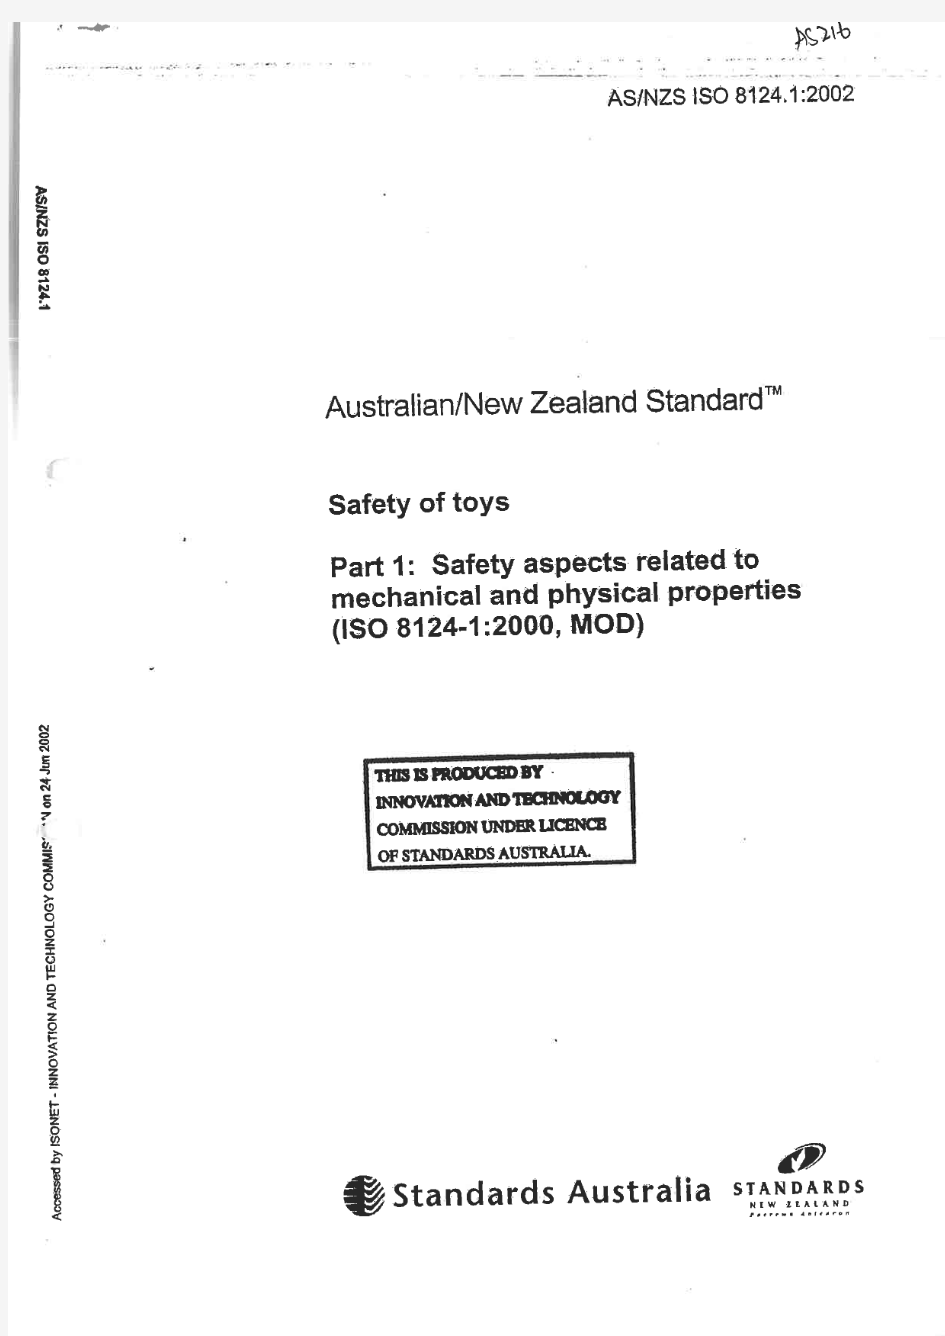 AS NZS ISO 8124.1-2002